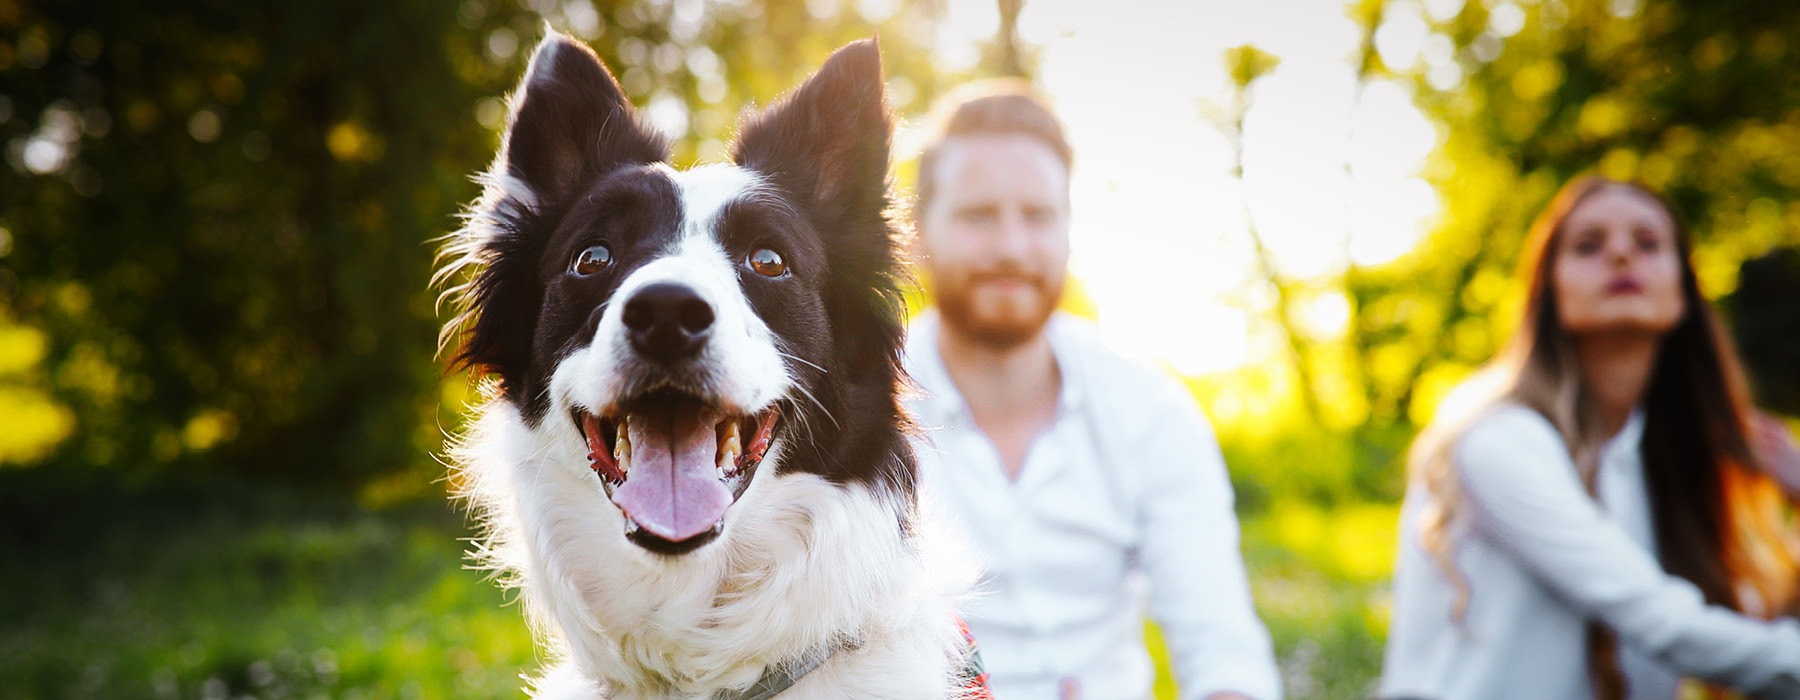 pet collie in a park, looks at the camera while owners watch him in the background